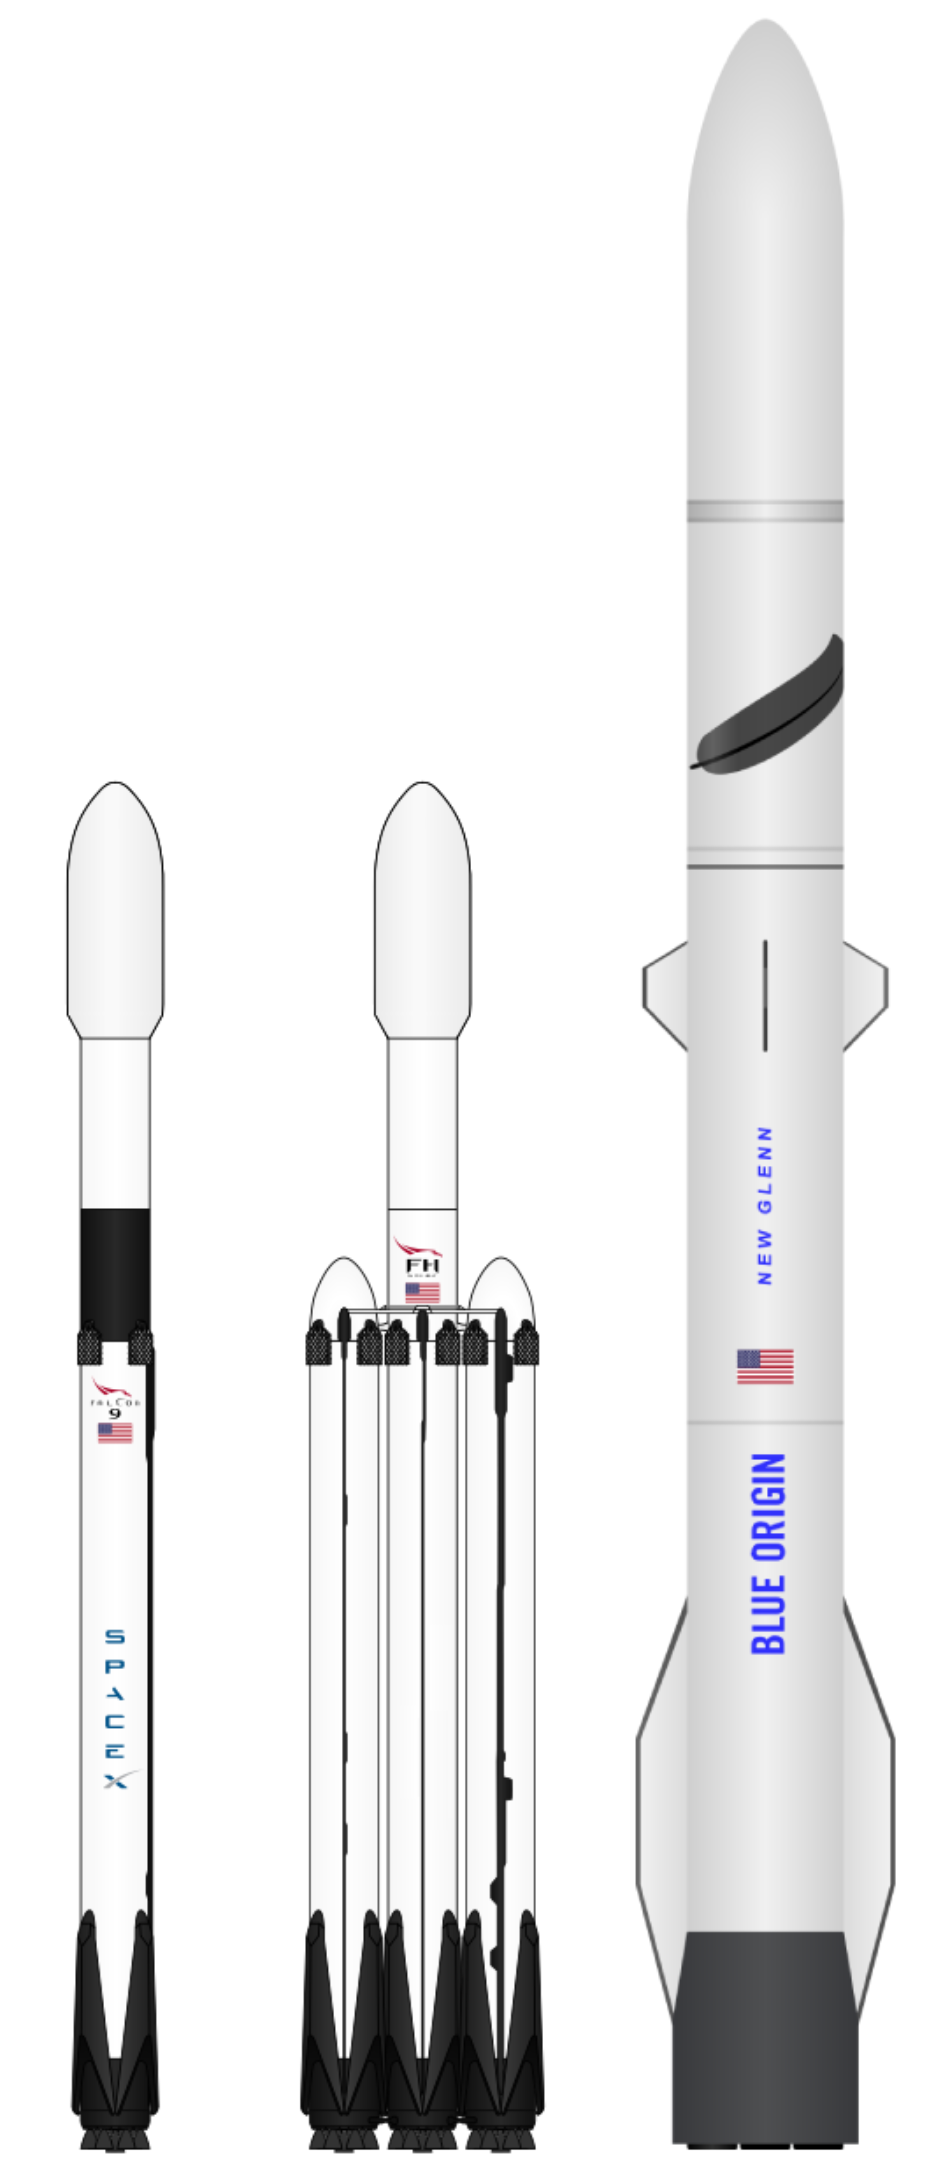 SpaceX's Falcon 9 (left) and Falcon Heavy (center) with Blue Origin's New Glenn (right). ©Wikimedia Commons/Avialuh/XYZtSpace